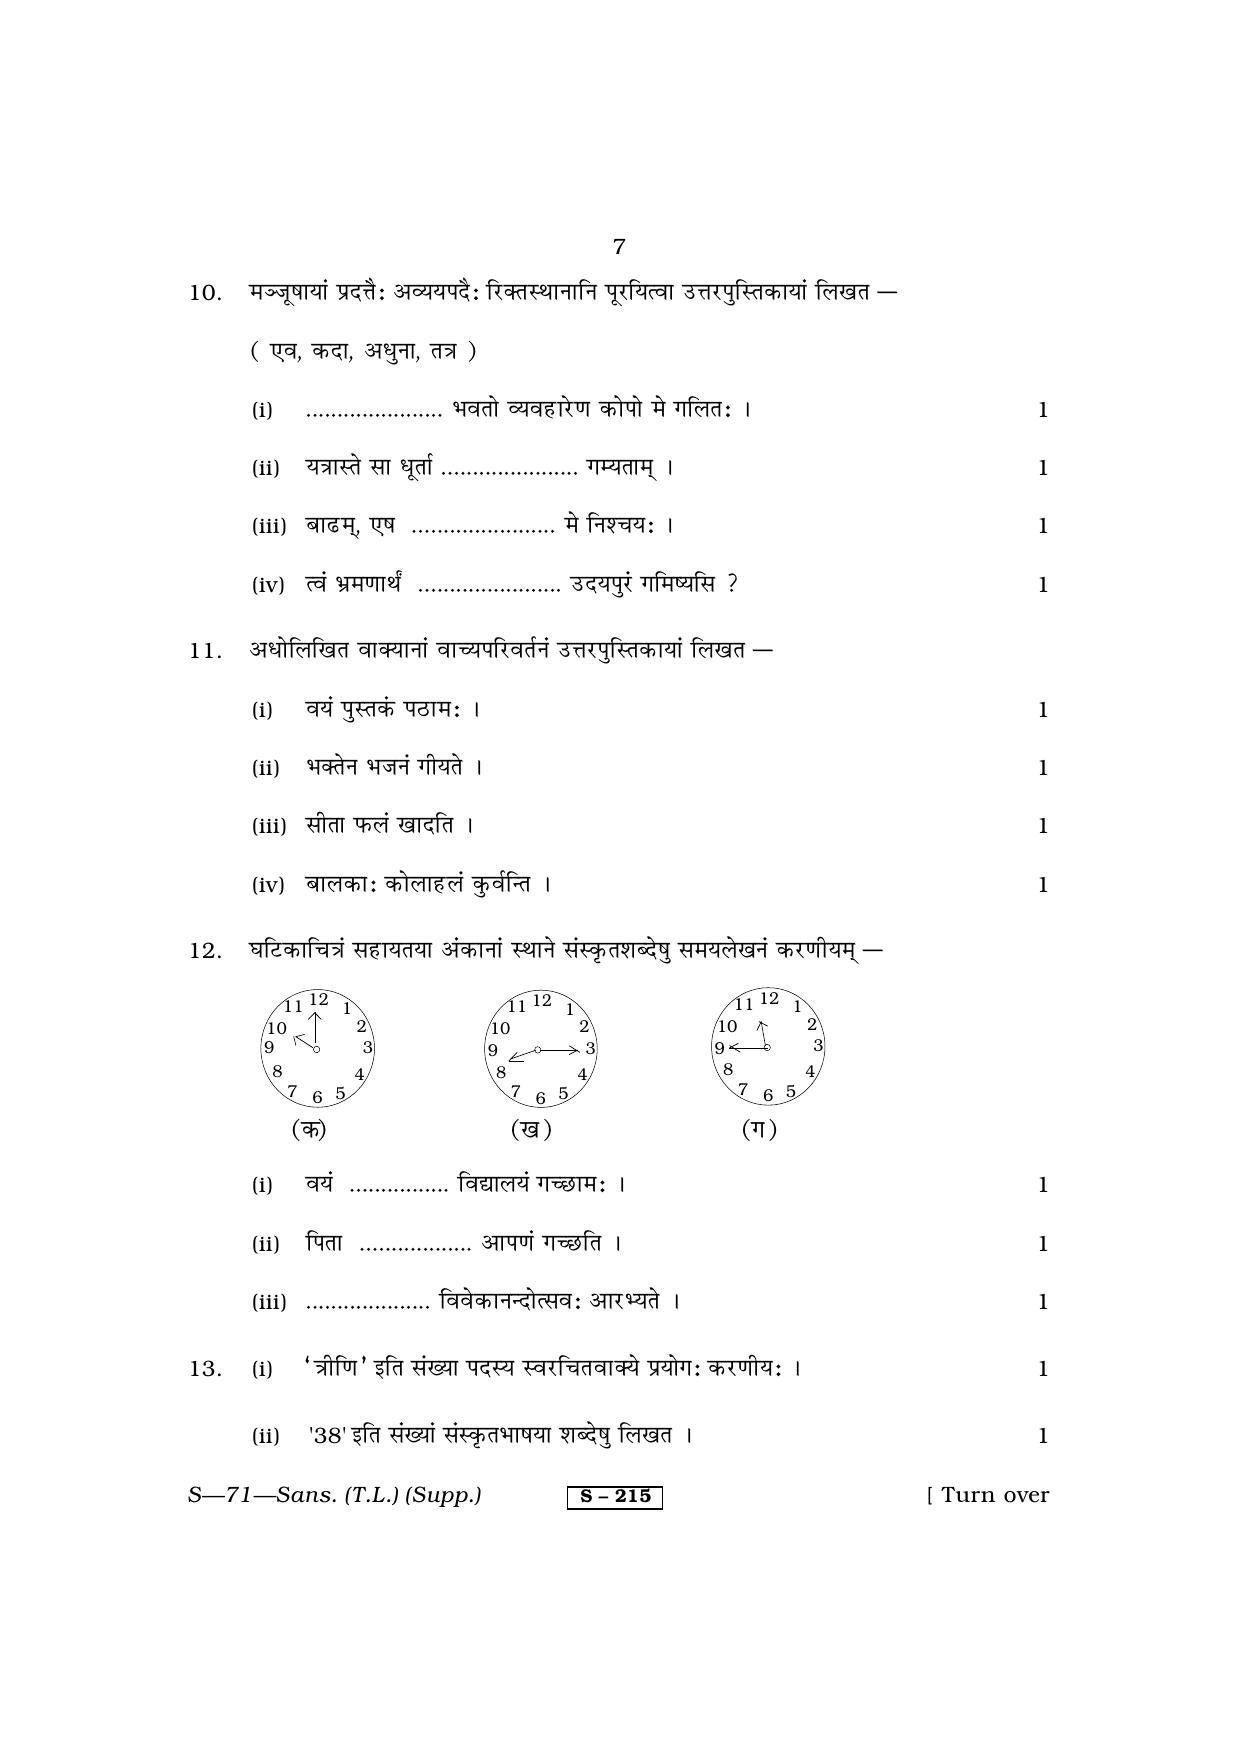 RBSE Class 10 Sanskrit (T.L.) Supplementary 2013 Question Paper - Page 7